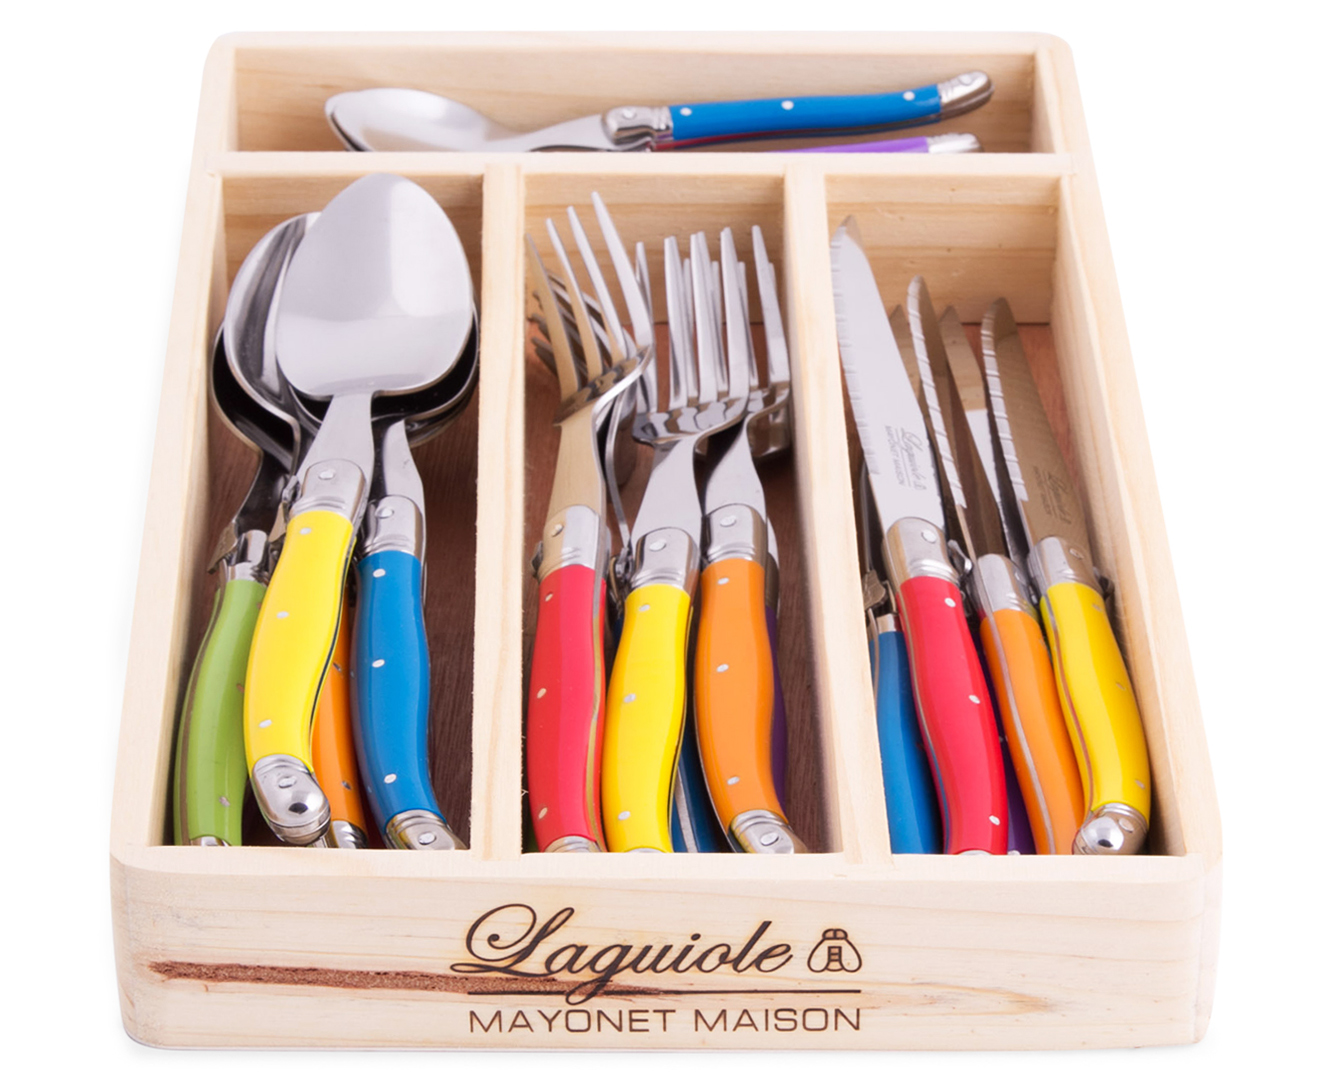 French Inspired Replica Mayonet Maison 24-Piece Cutlery Set - Multi